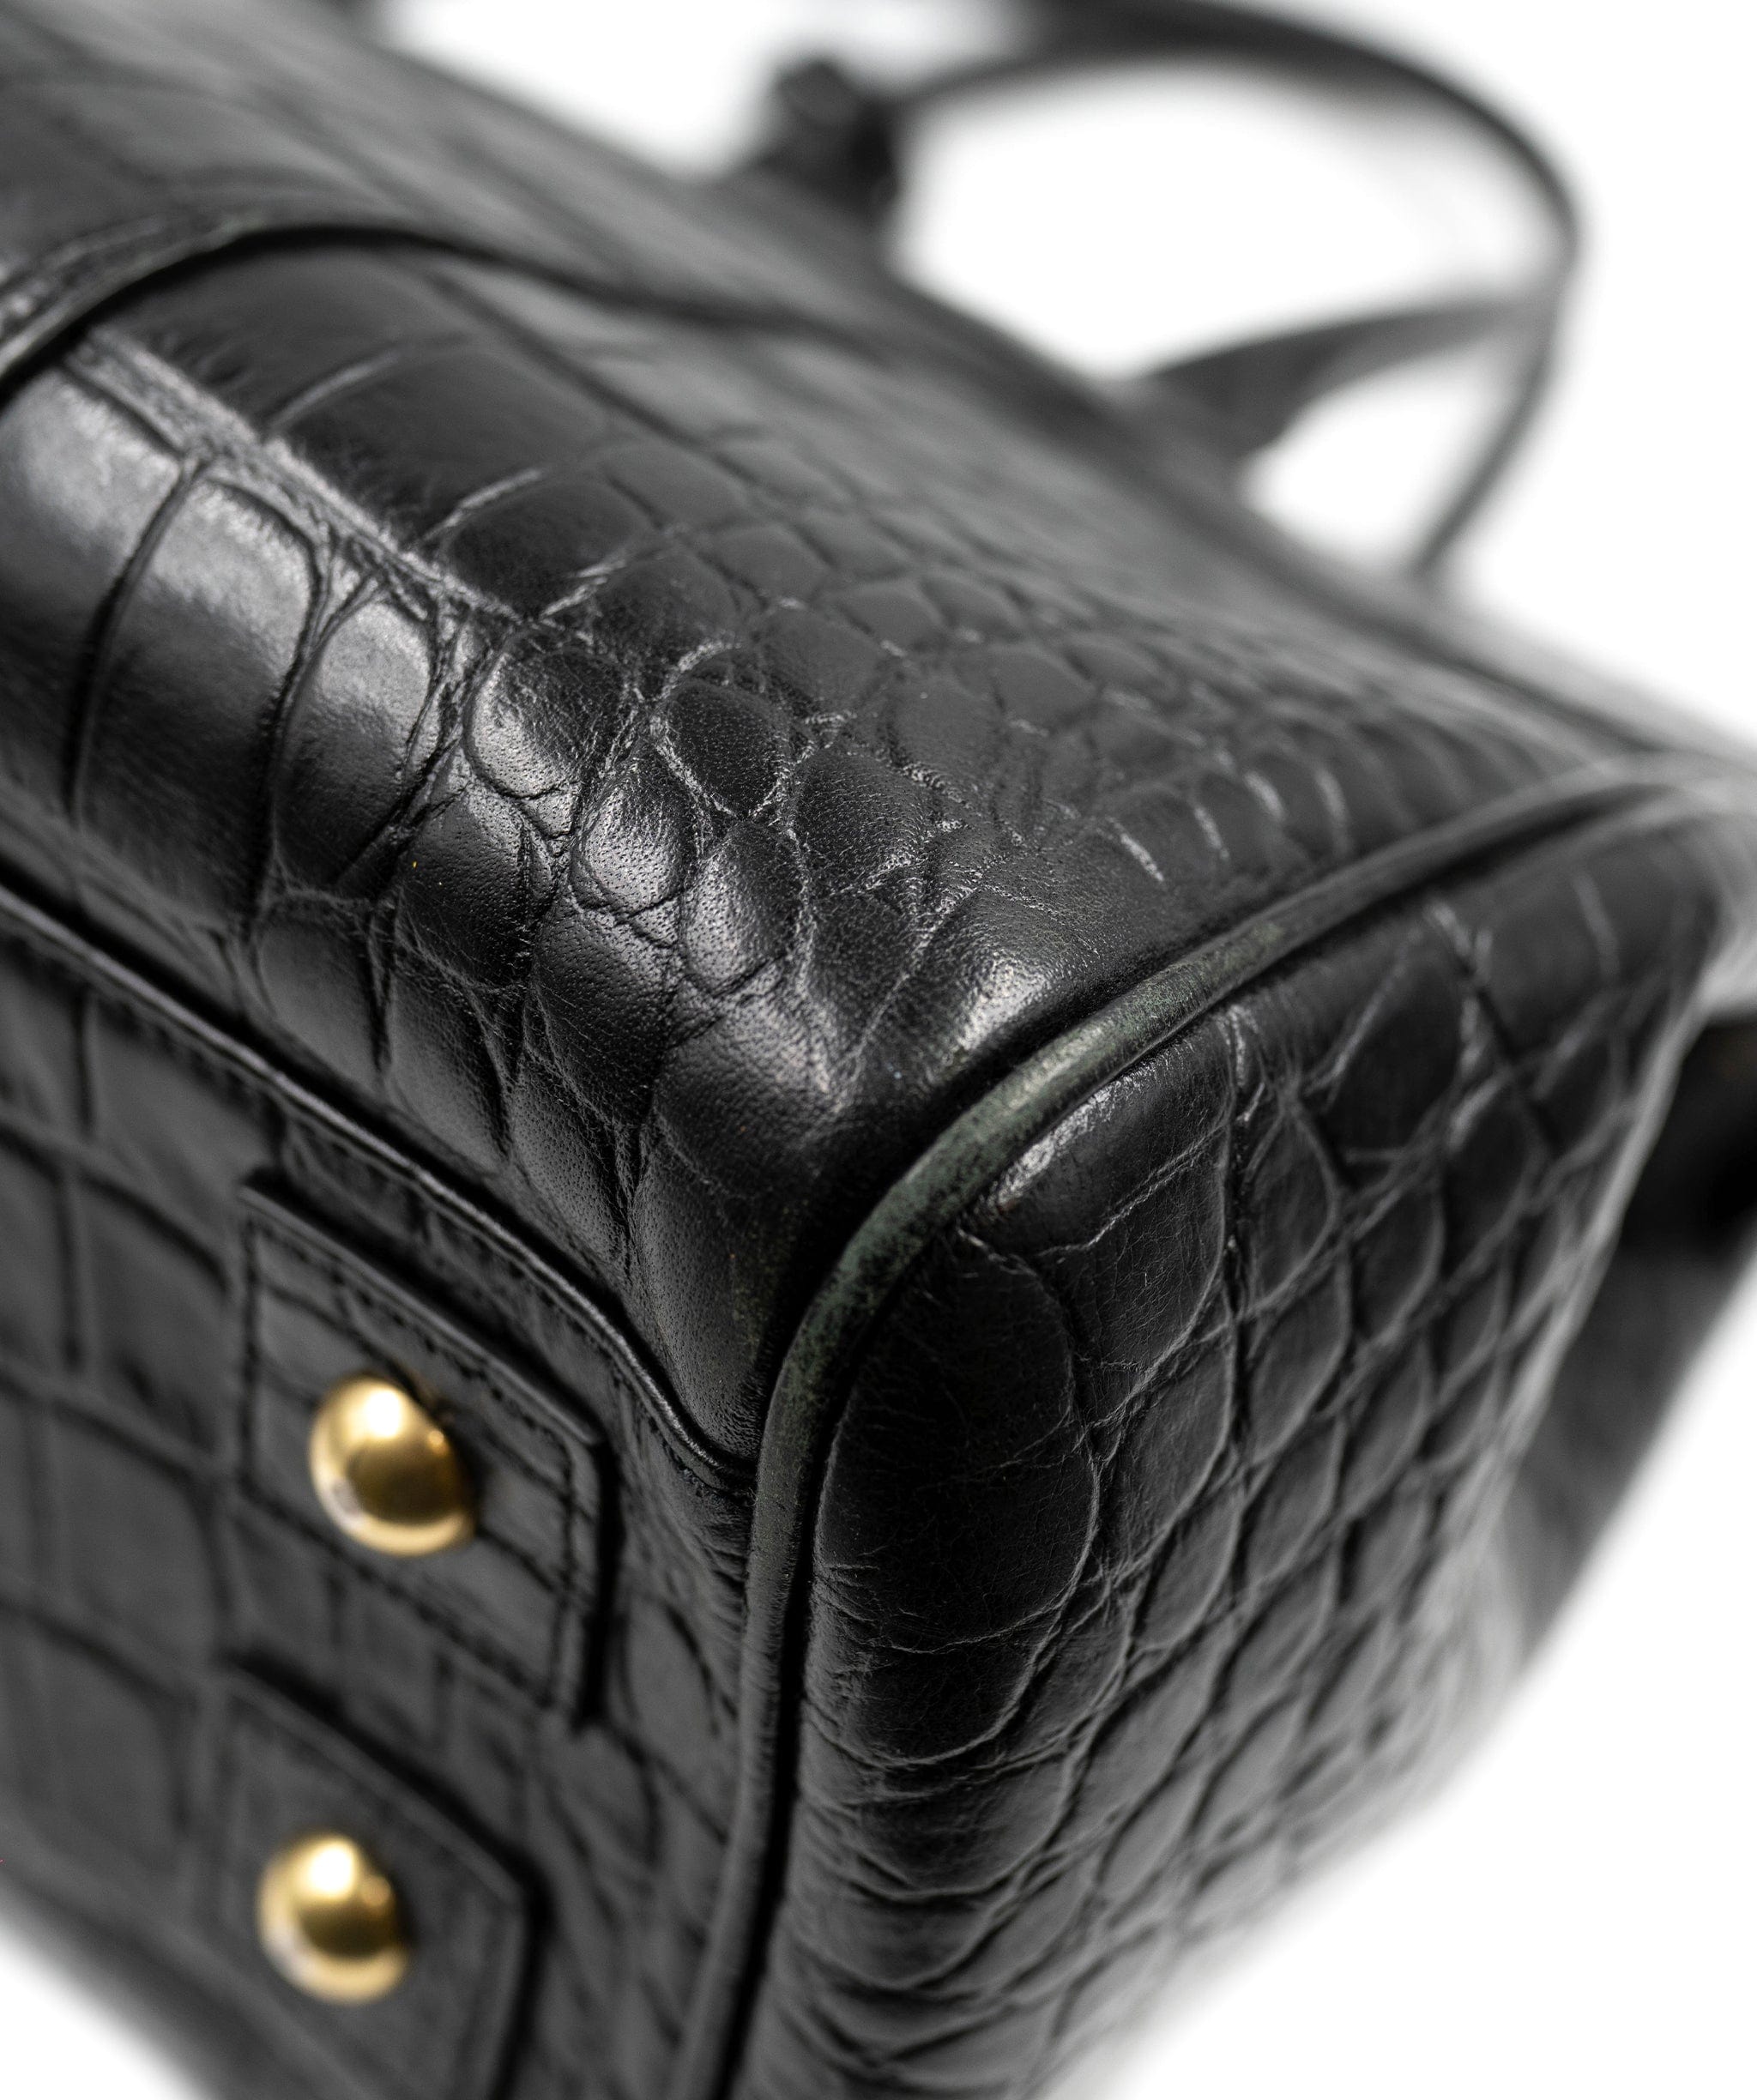 Mulberry Mulberry Black croc bayswater AGC1332